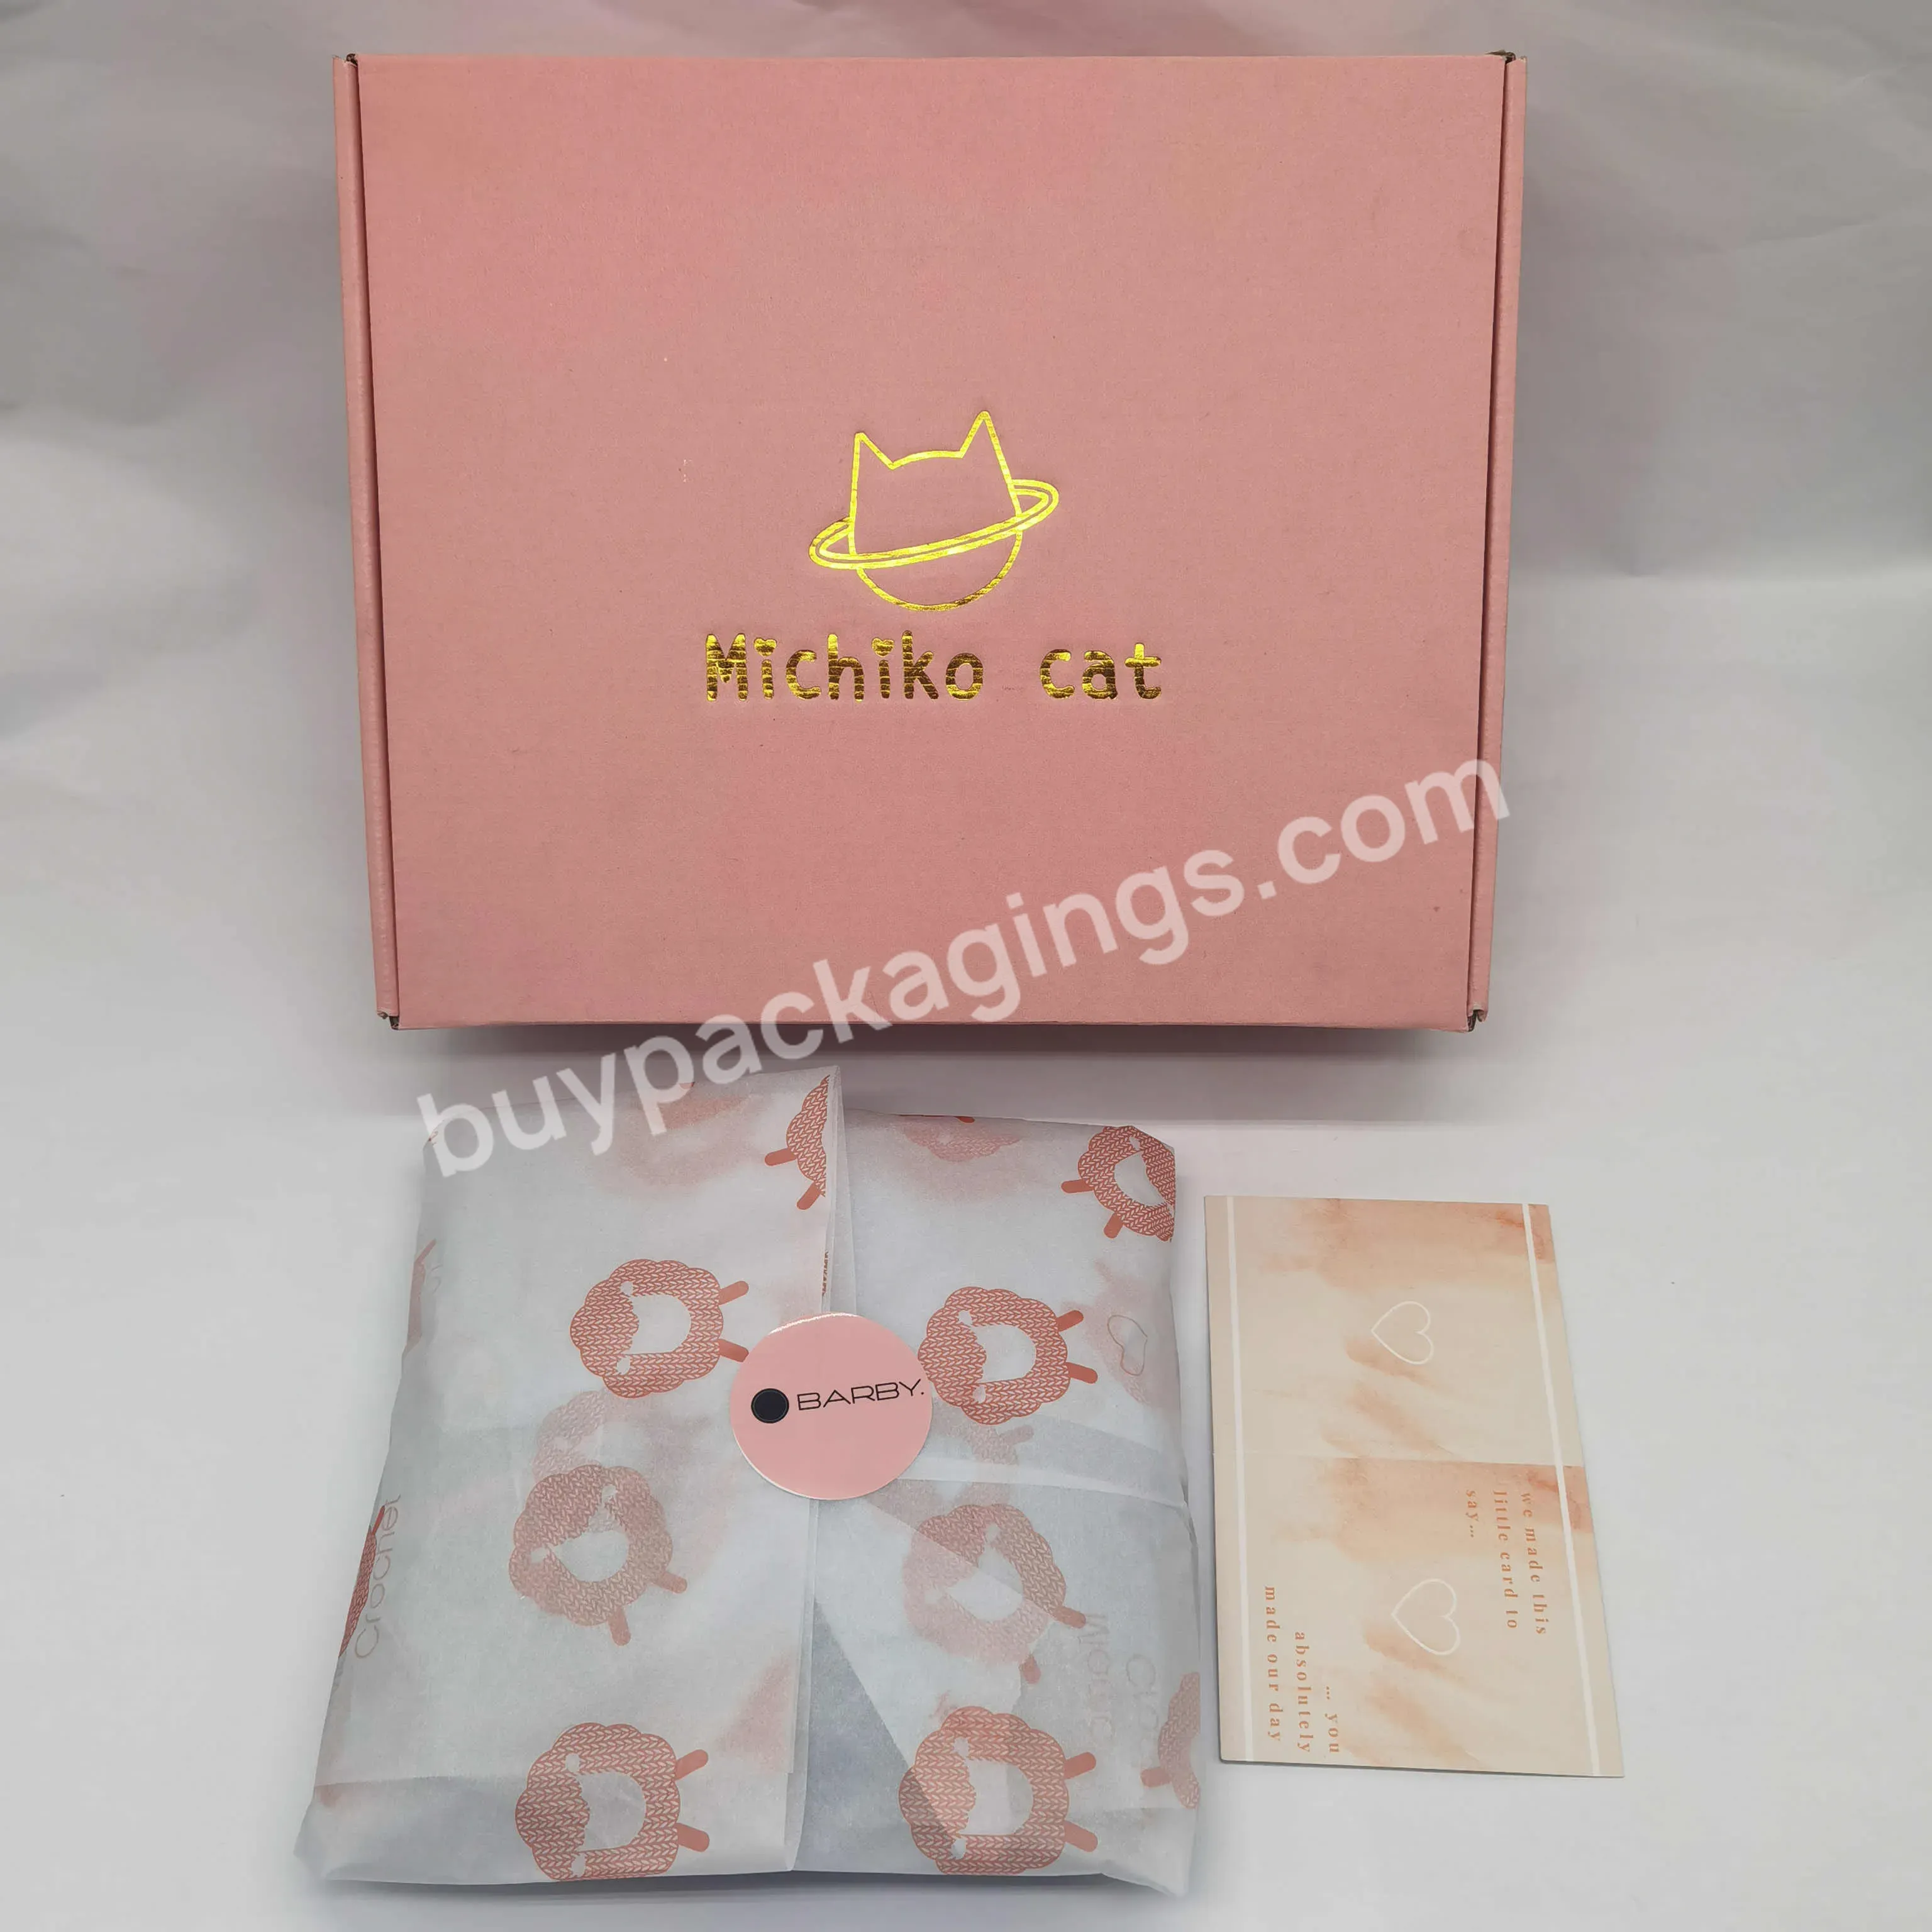 Sales China Factory Price Tissue Paper In Box Custom Tissue Paper Packaging For Tshirts - Buy Tissue Paper Roll For Packaging,Custom Tissue Paper,Gift Tissue Paper.